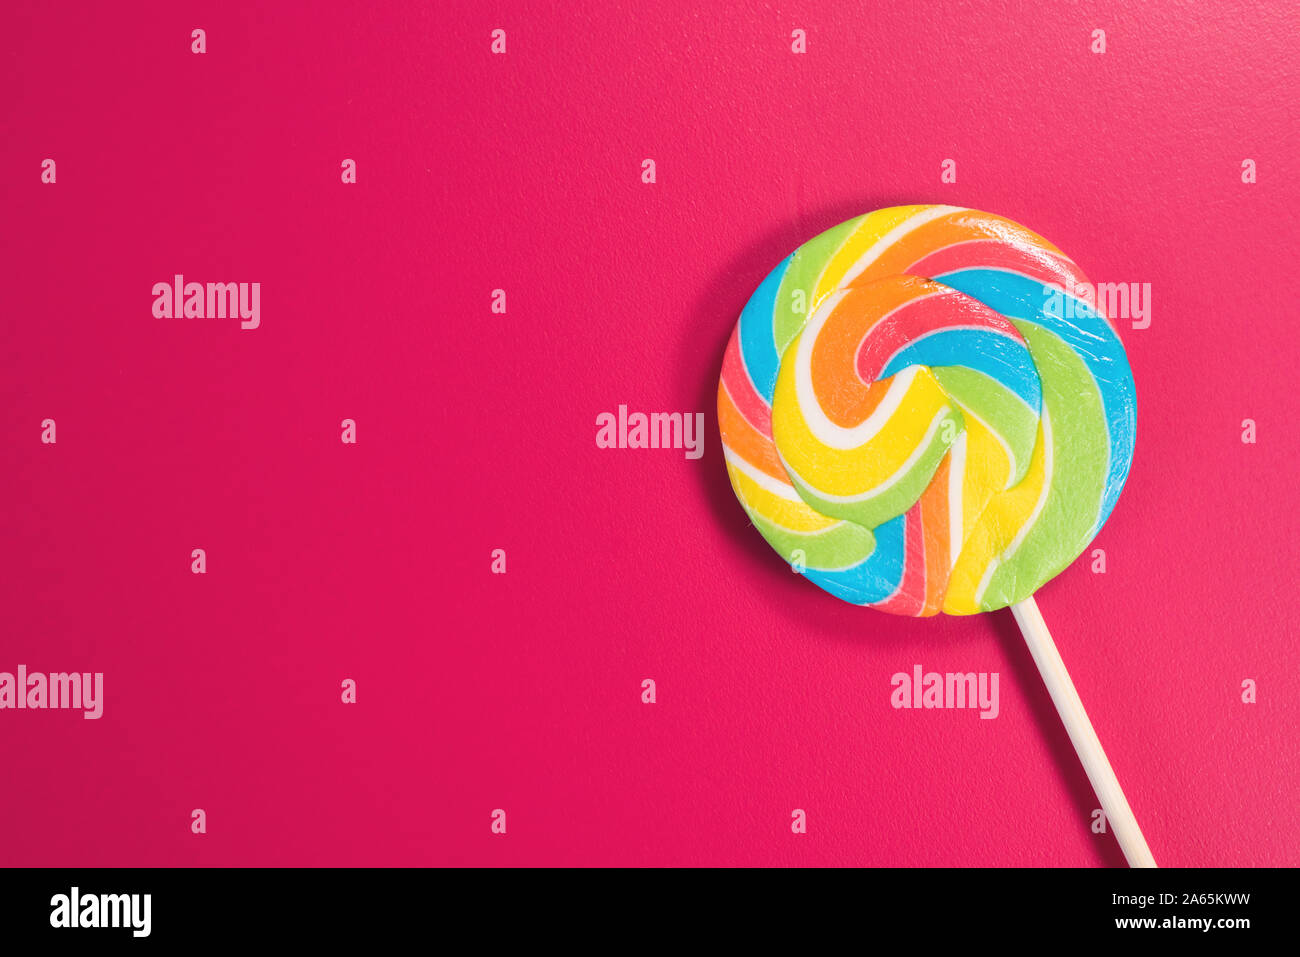 Swirl round lollipop on pink background. concept of unhealthy food ...